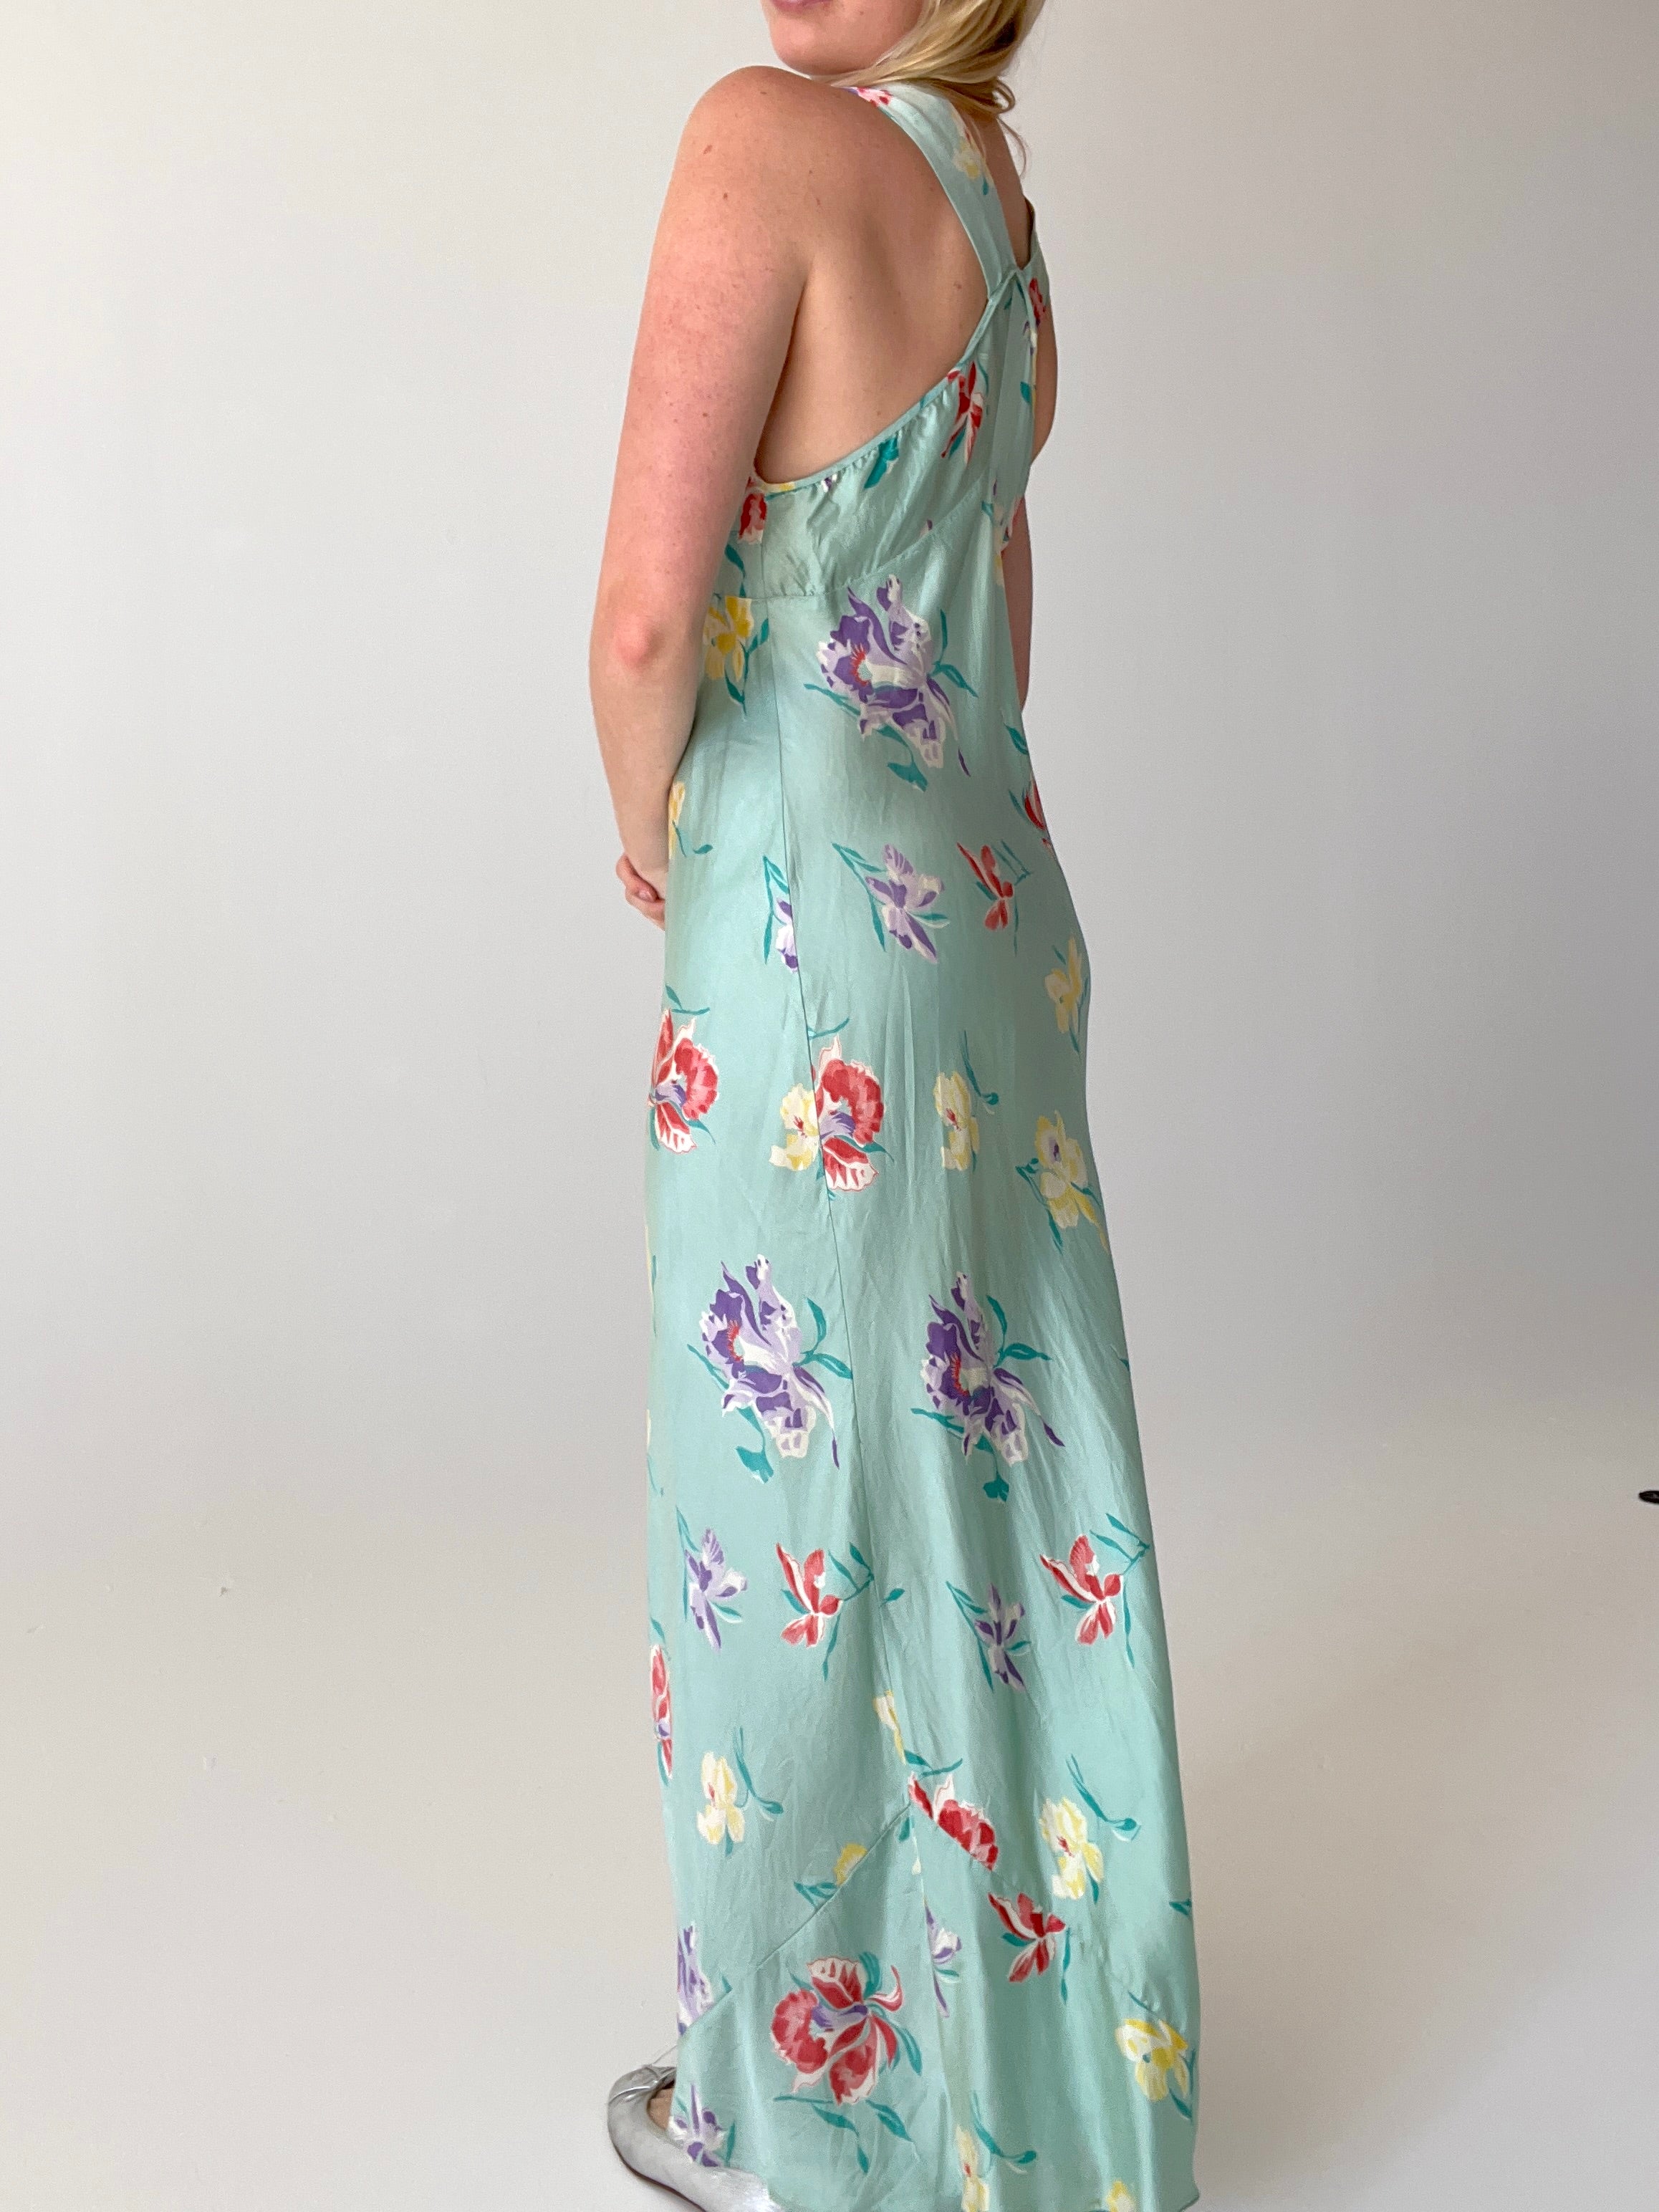 1930's Turquoise Tropical Floral Slip